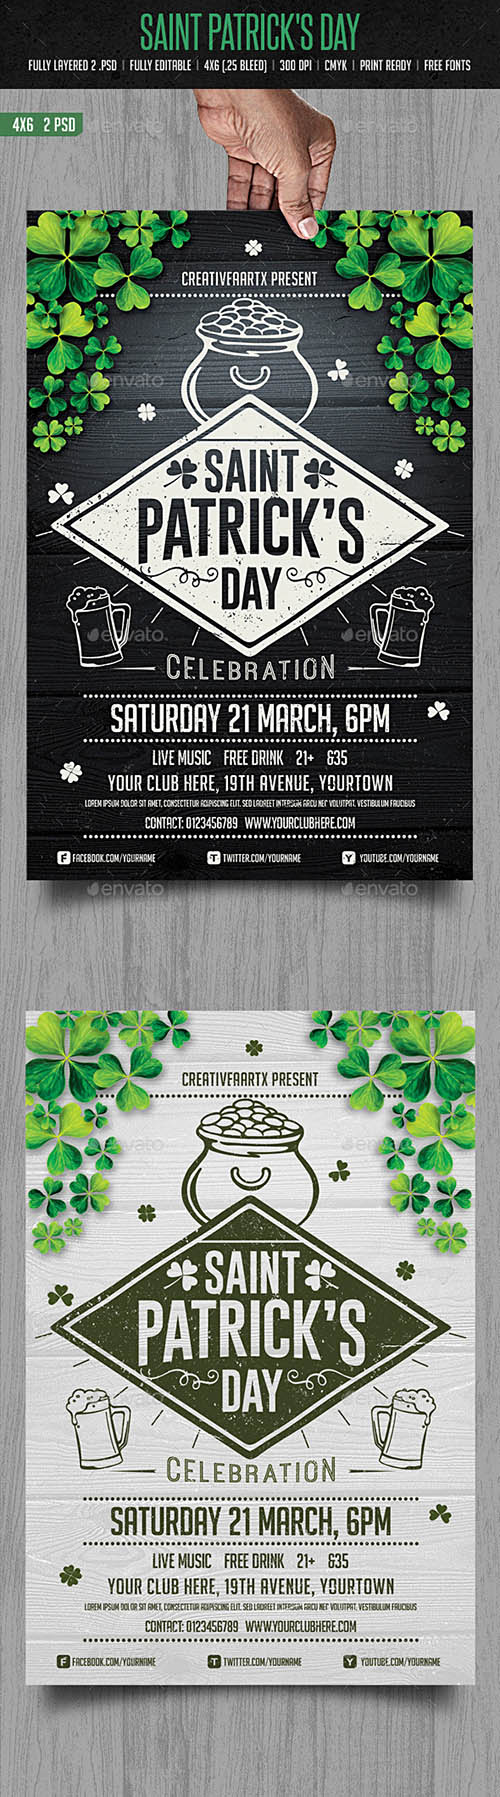 GraphicRiver - St. Patrick's Day Flyer 10406702